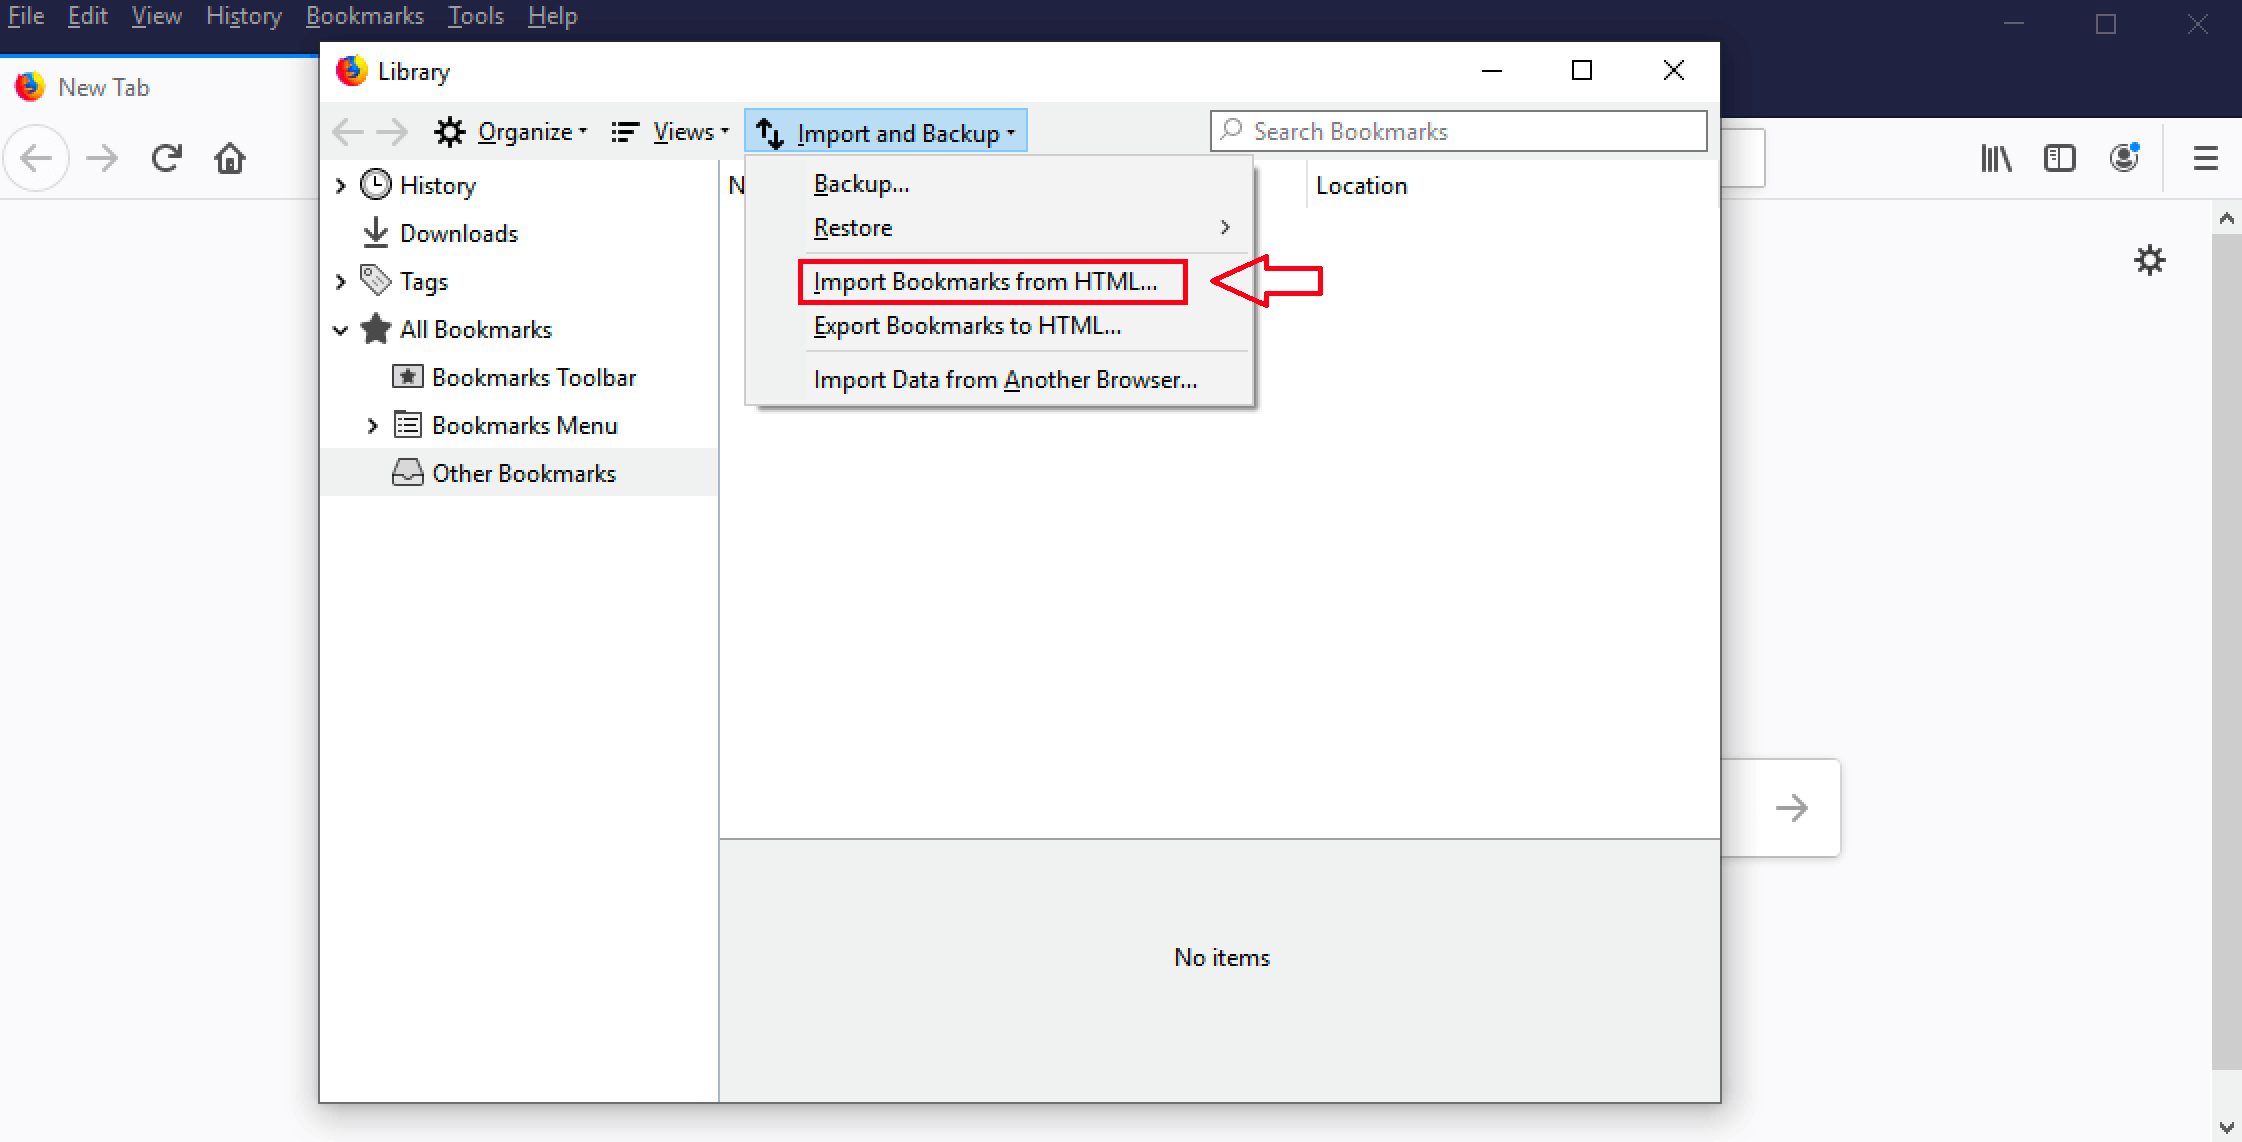 Firefox bookmarks library and “Import Bookmarks from HTML...” option